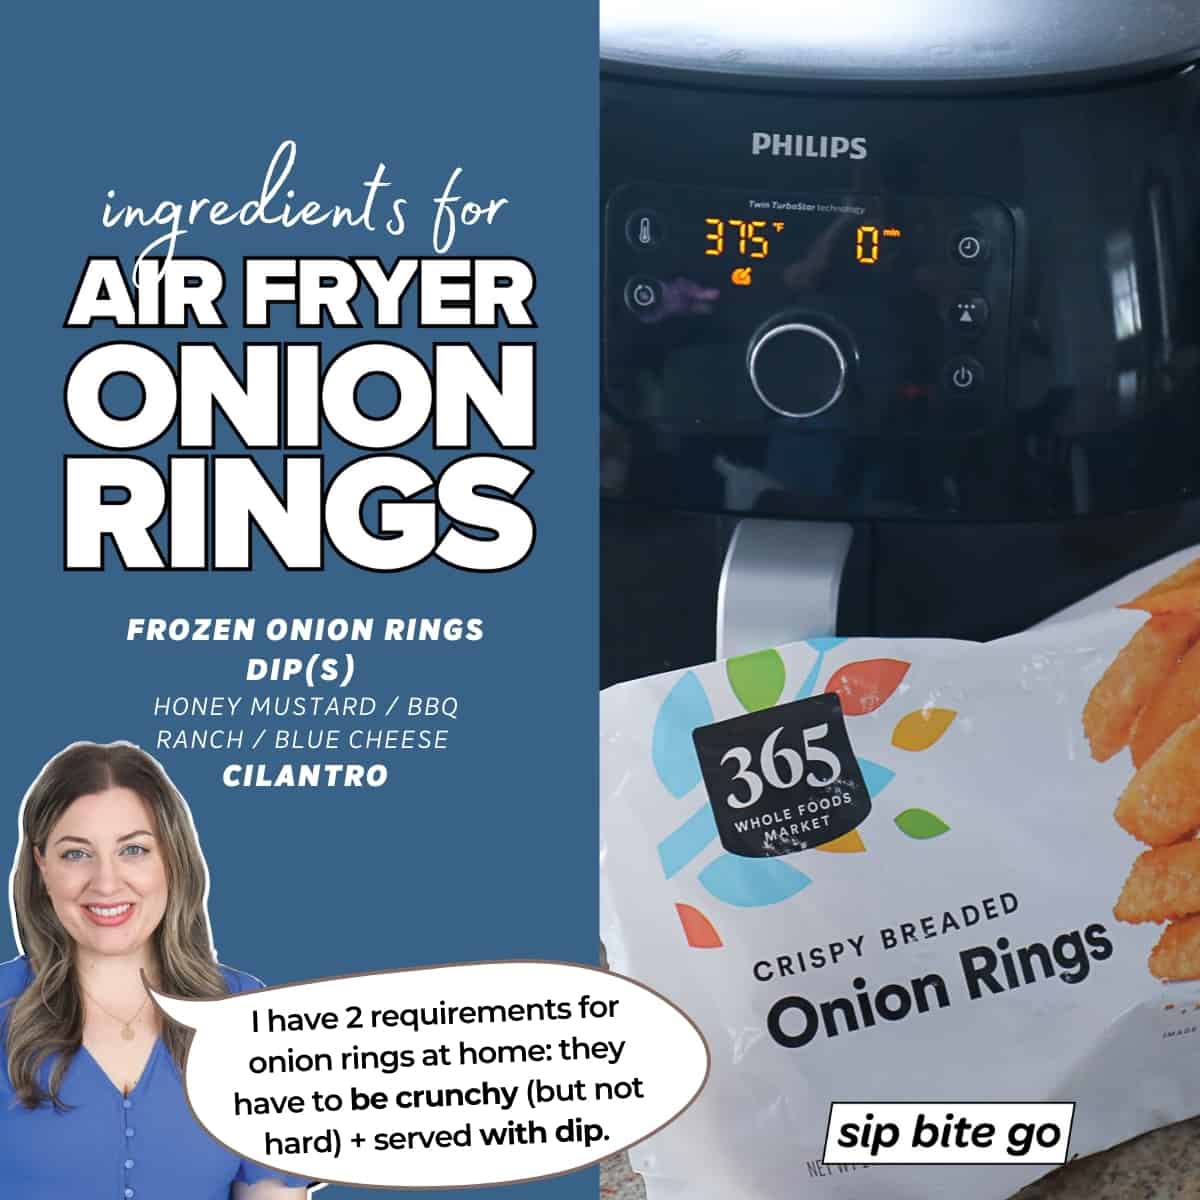 Infographic with ingredients for making Air Fryer Onion Rings from frozen